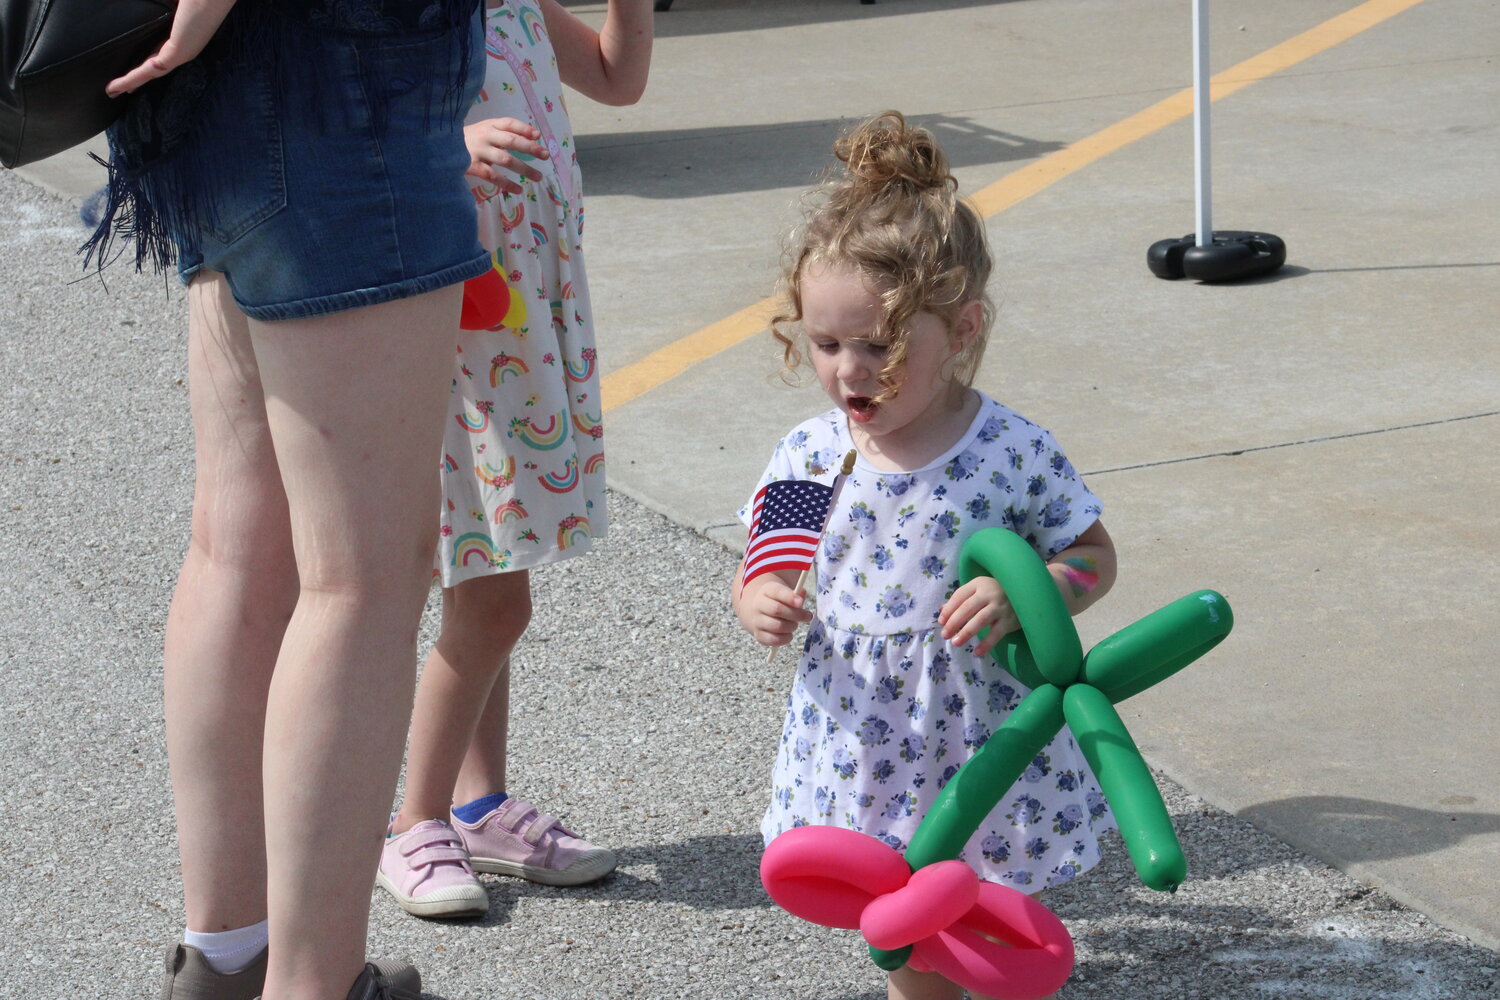 A young girl waves her flag and carries her balloon creation during the Fall Festival.